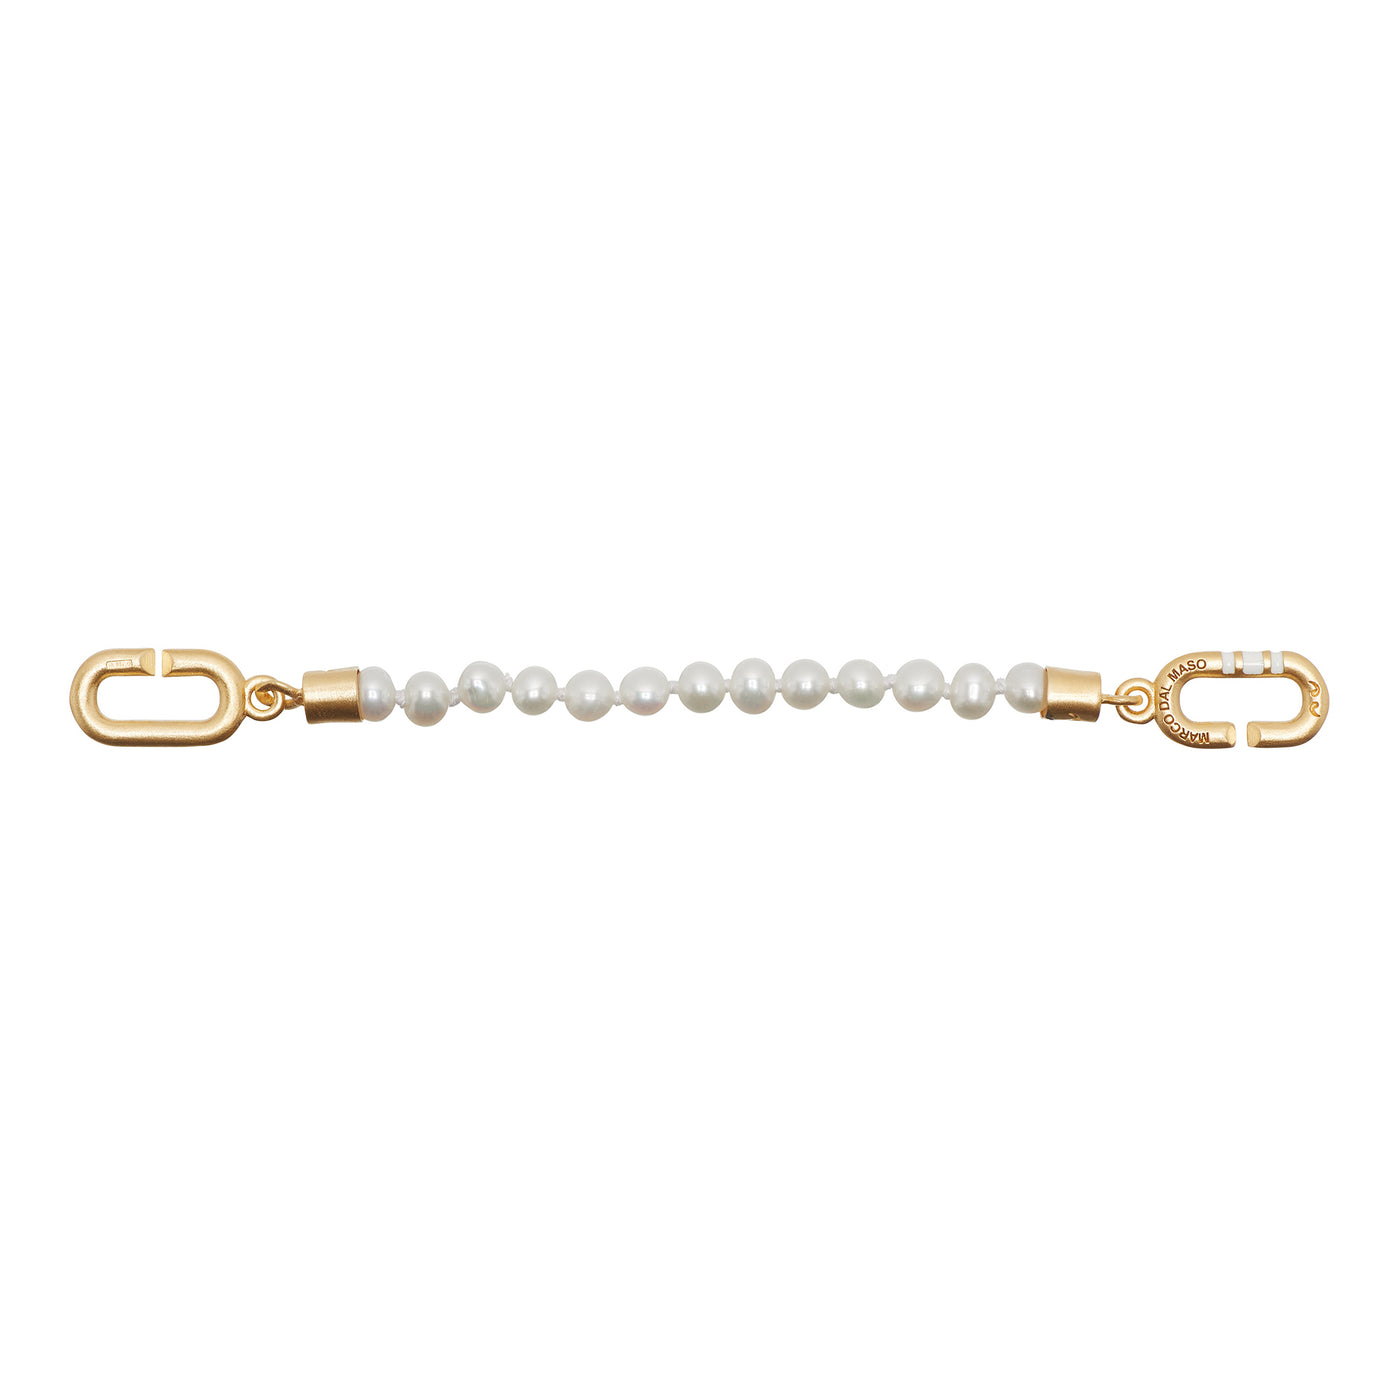 THE LINK Pearl Extension Beads with Vermeil